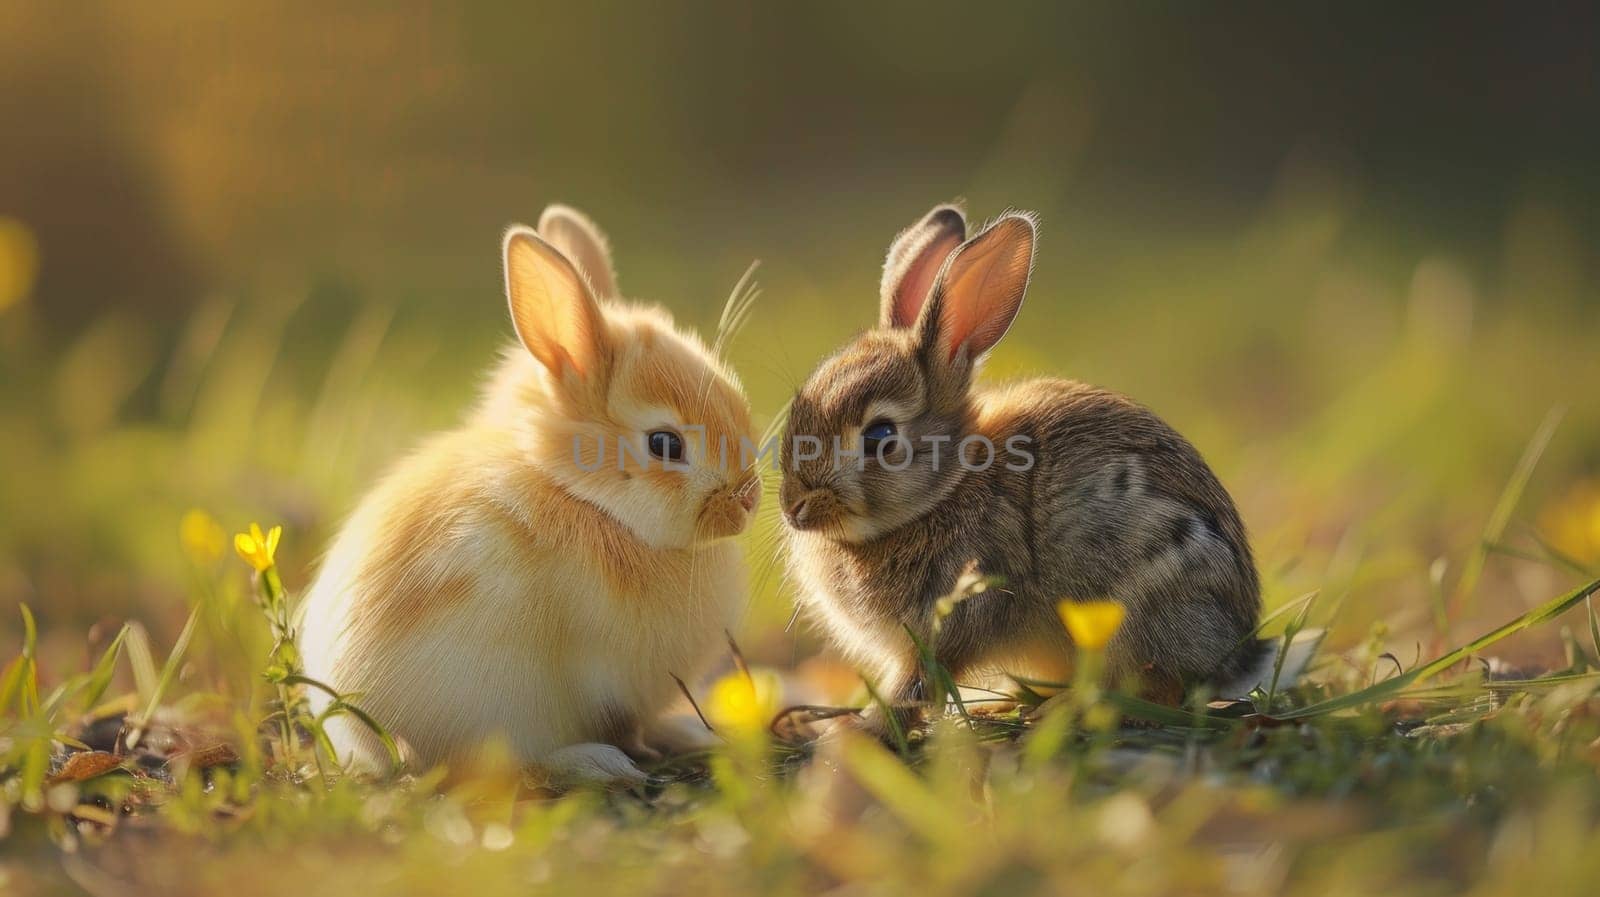 Two rabbits are sitting in the grass and touching noses